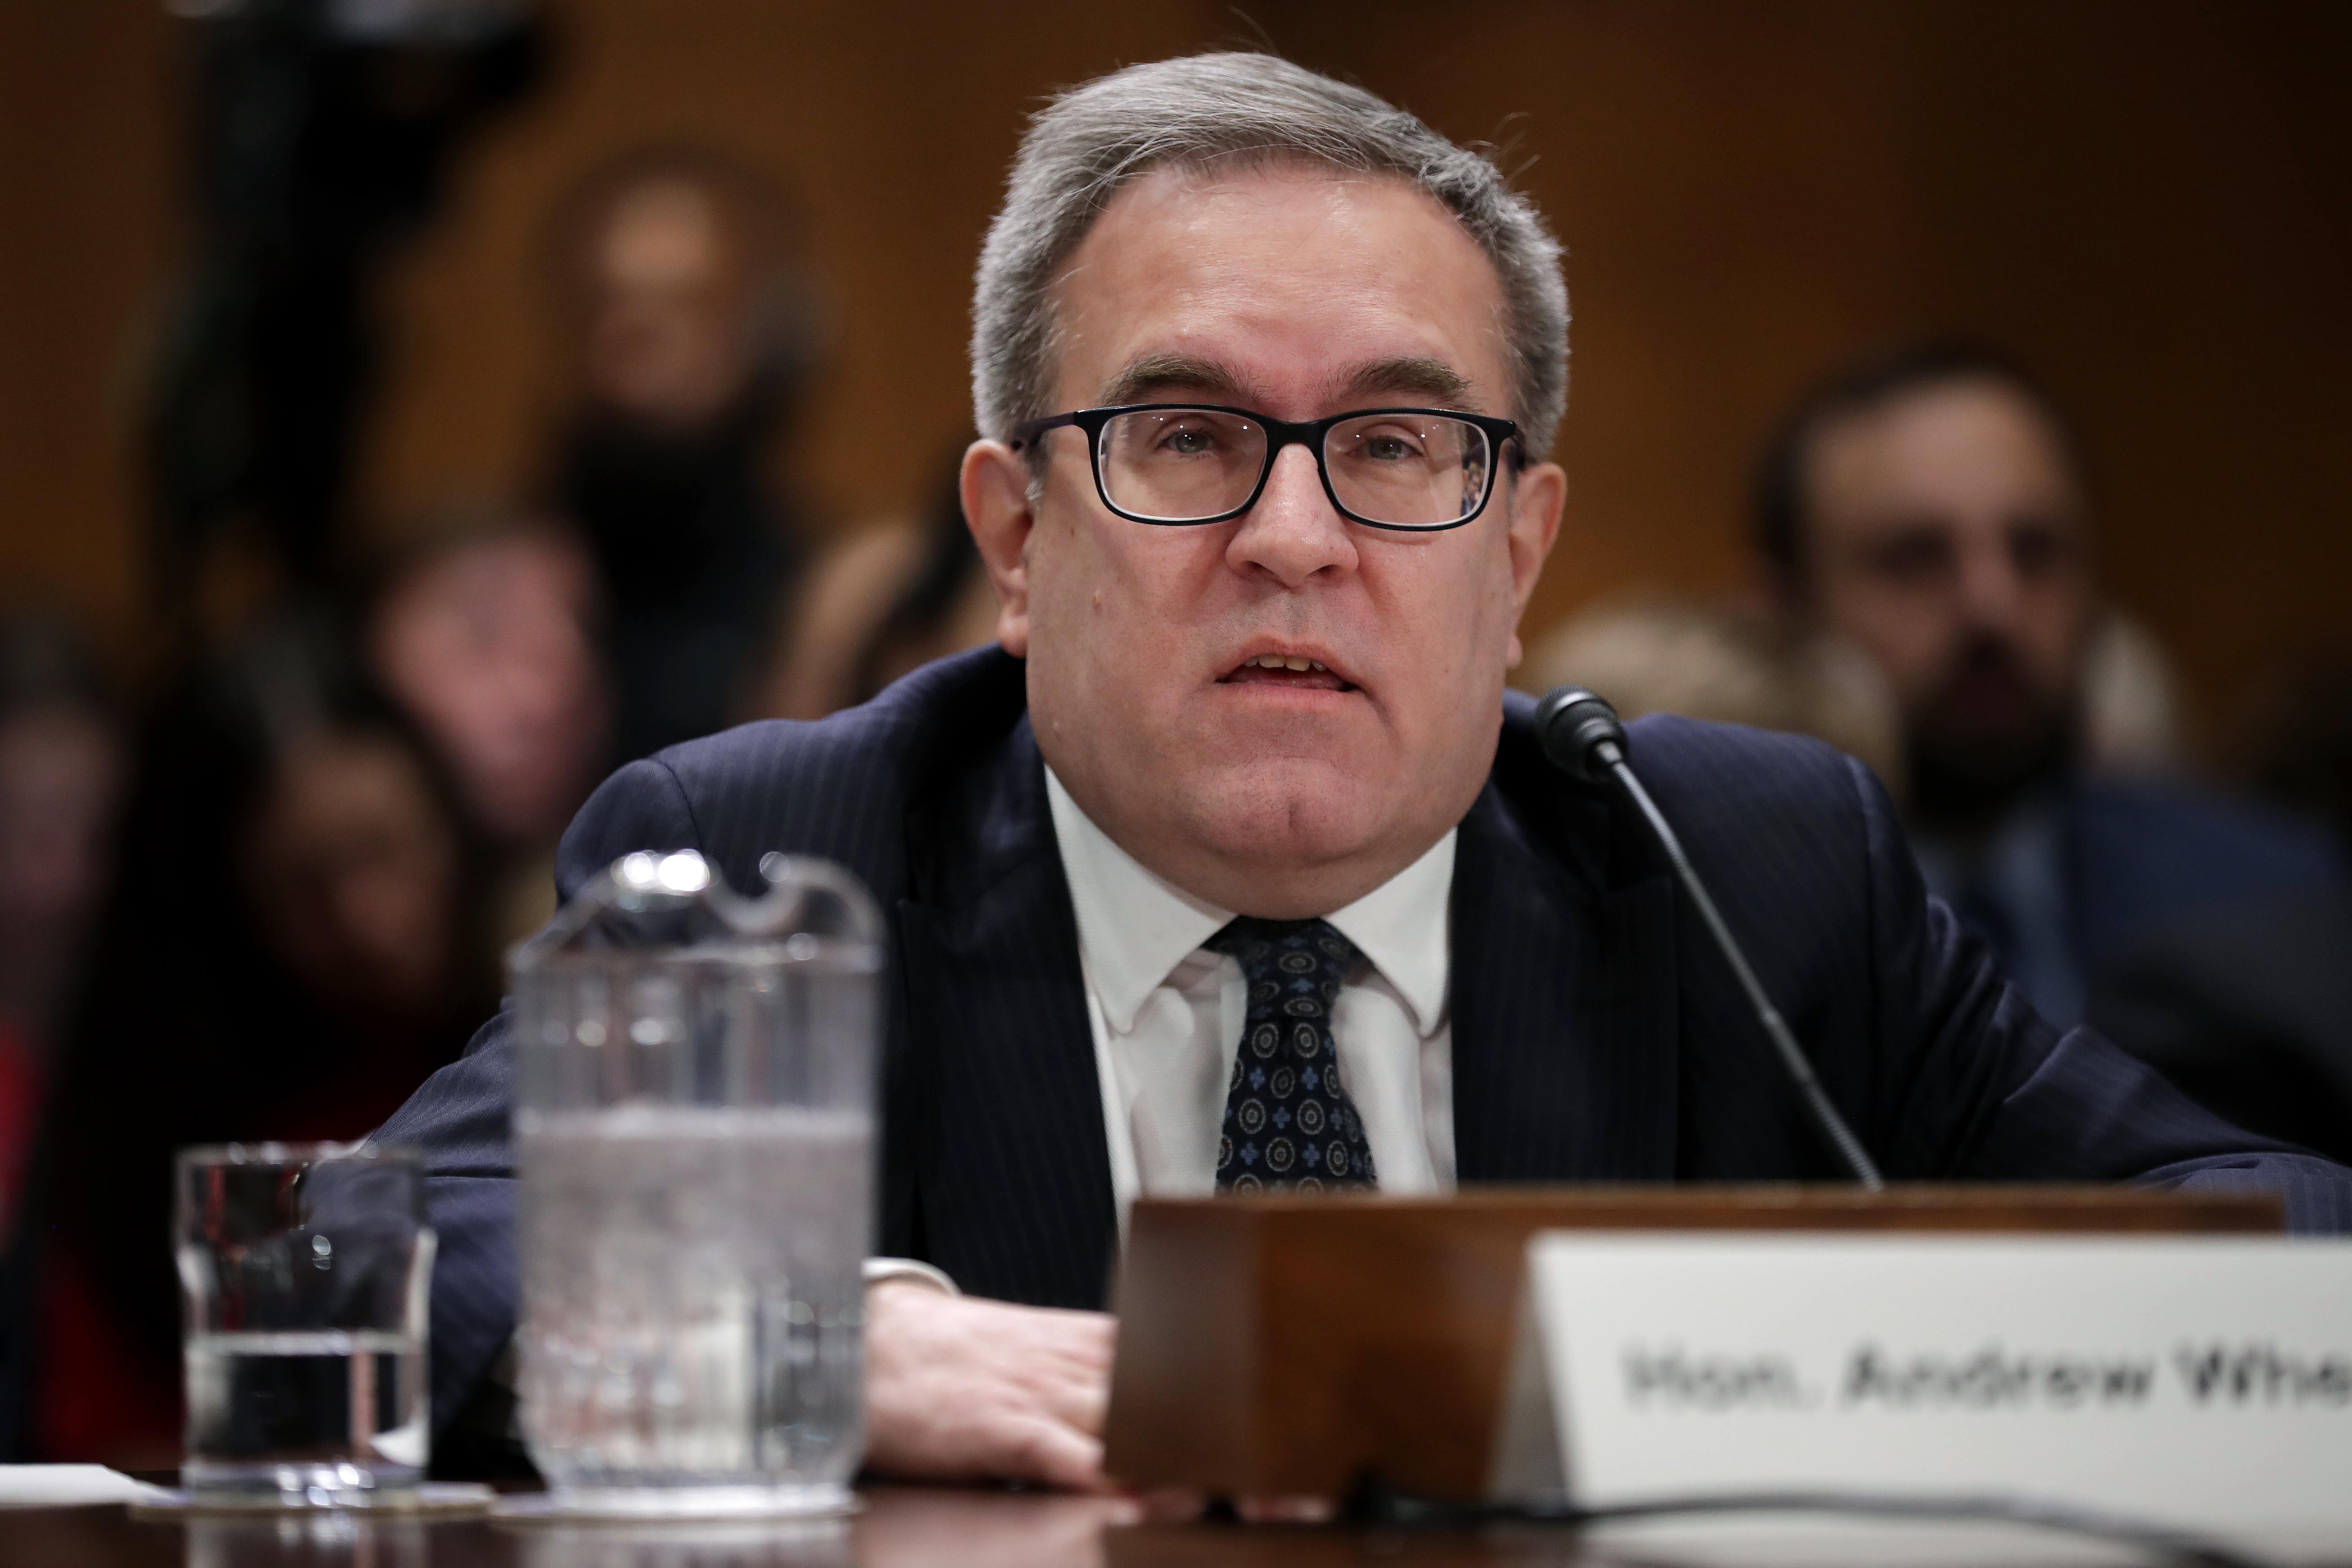 Andrew Wheeler answers senators' questions during his confirmation hearing to be the next administrator of the Environmental Protection Agency